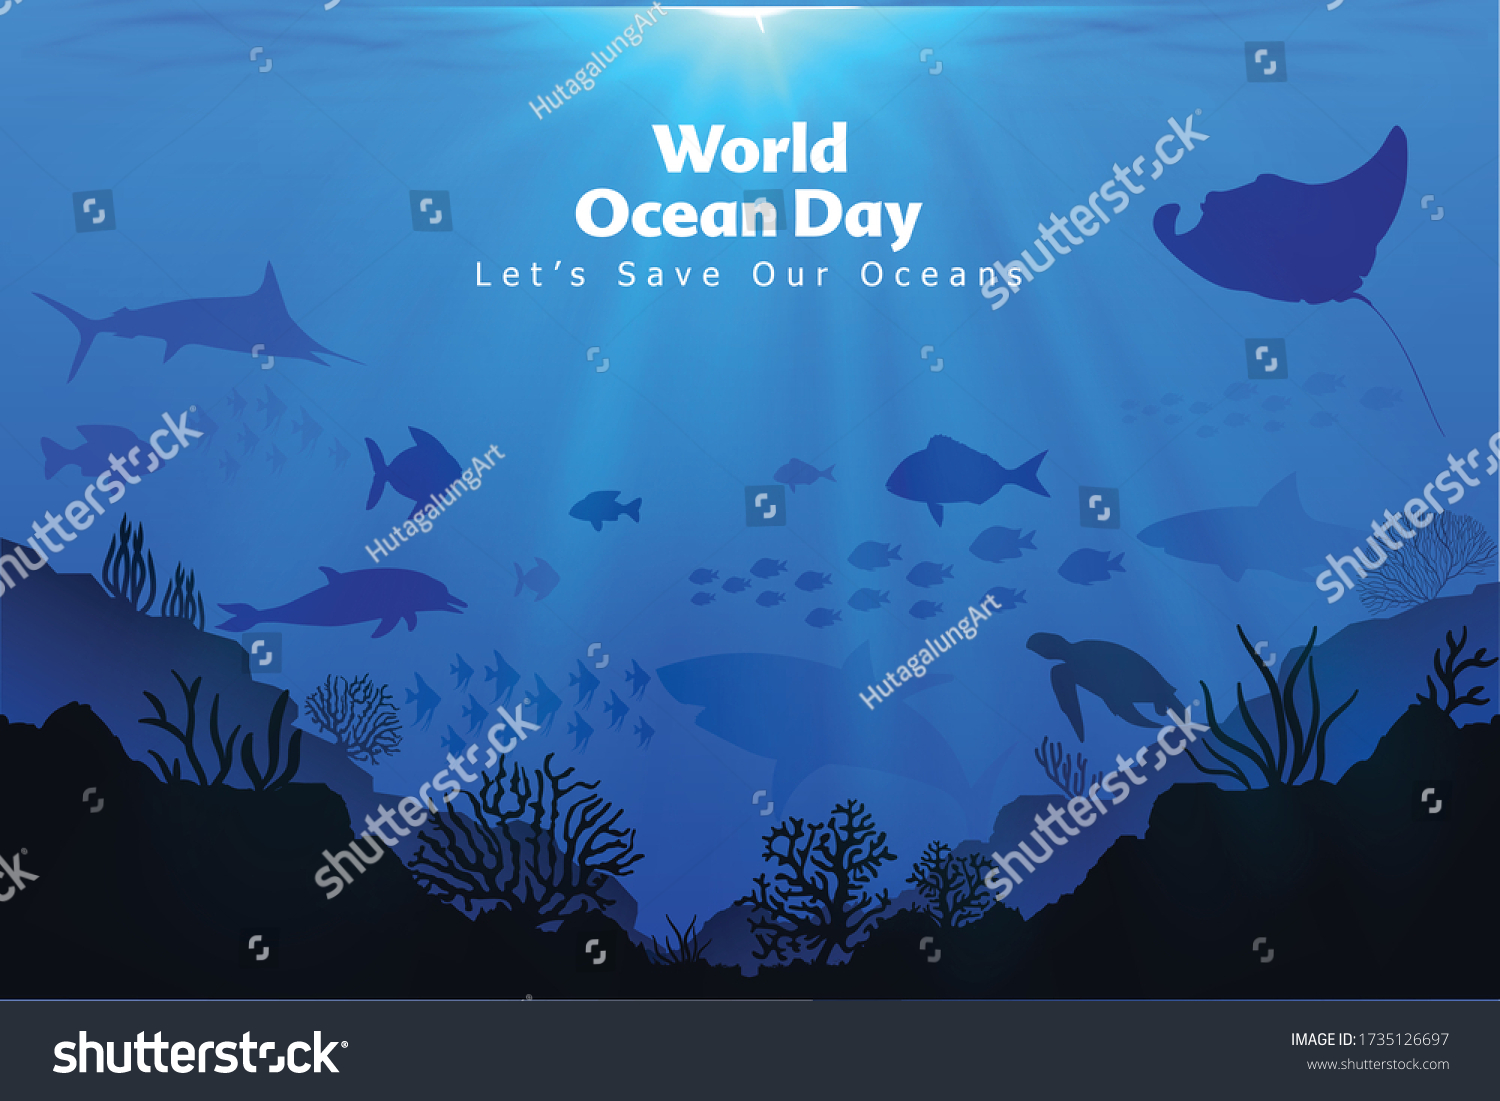 Let's save our oceans. World oceans day design with underwater ocean, dolphin, shark, coral, sea plants, stingray and turtle #1735126697